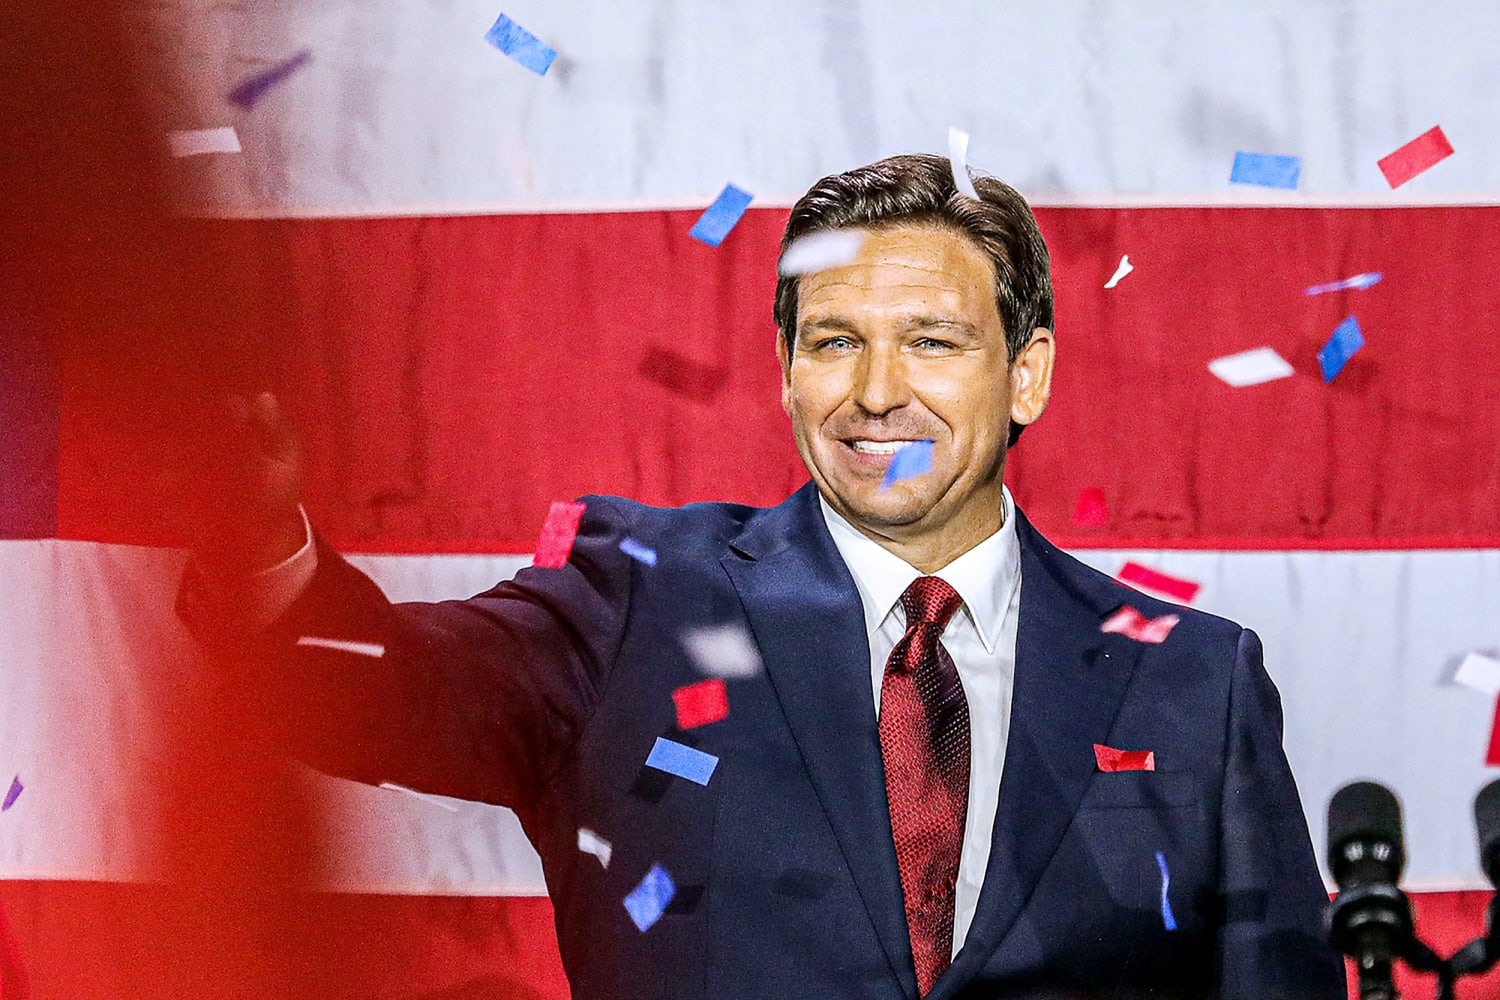 DeSantis’ assault on ‘leftism’ is totalitarianism in disguise